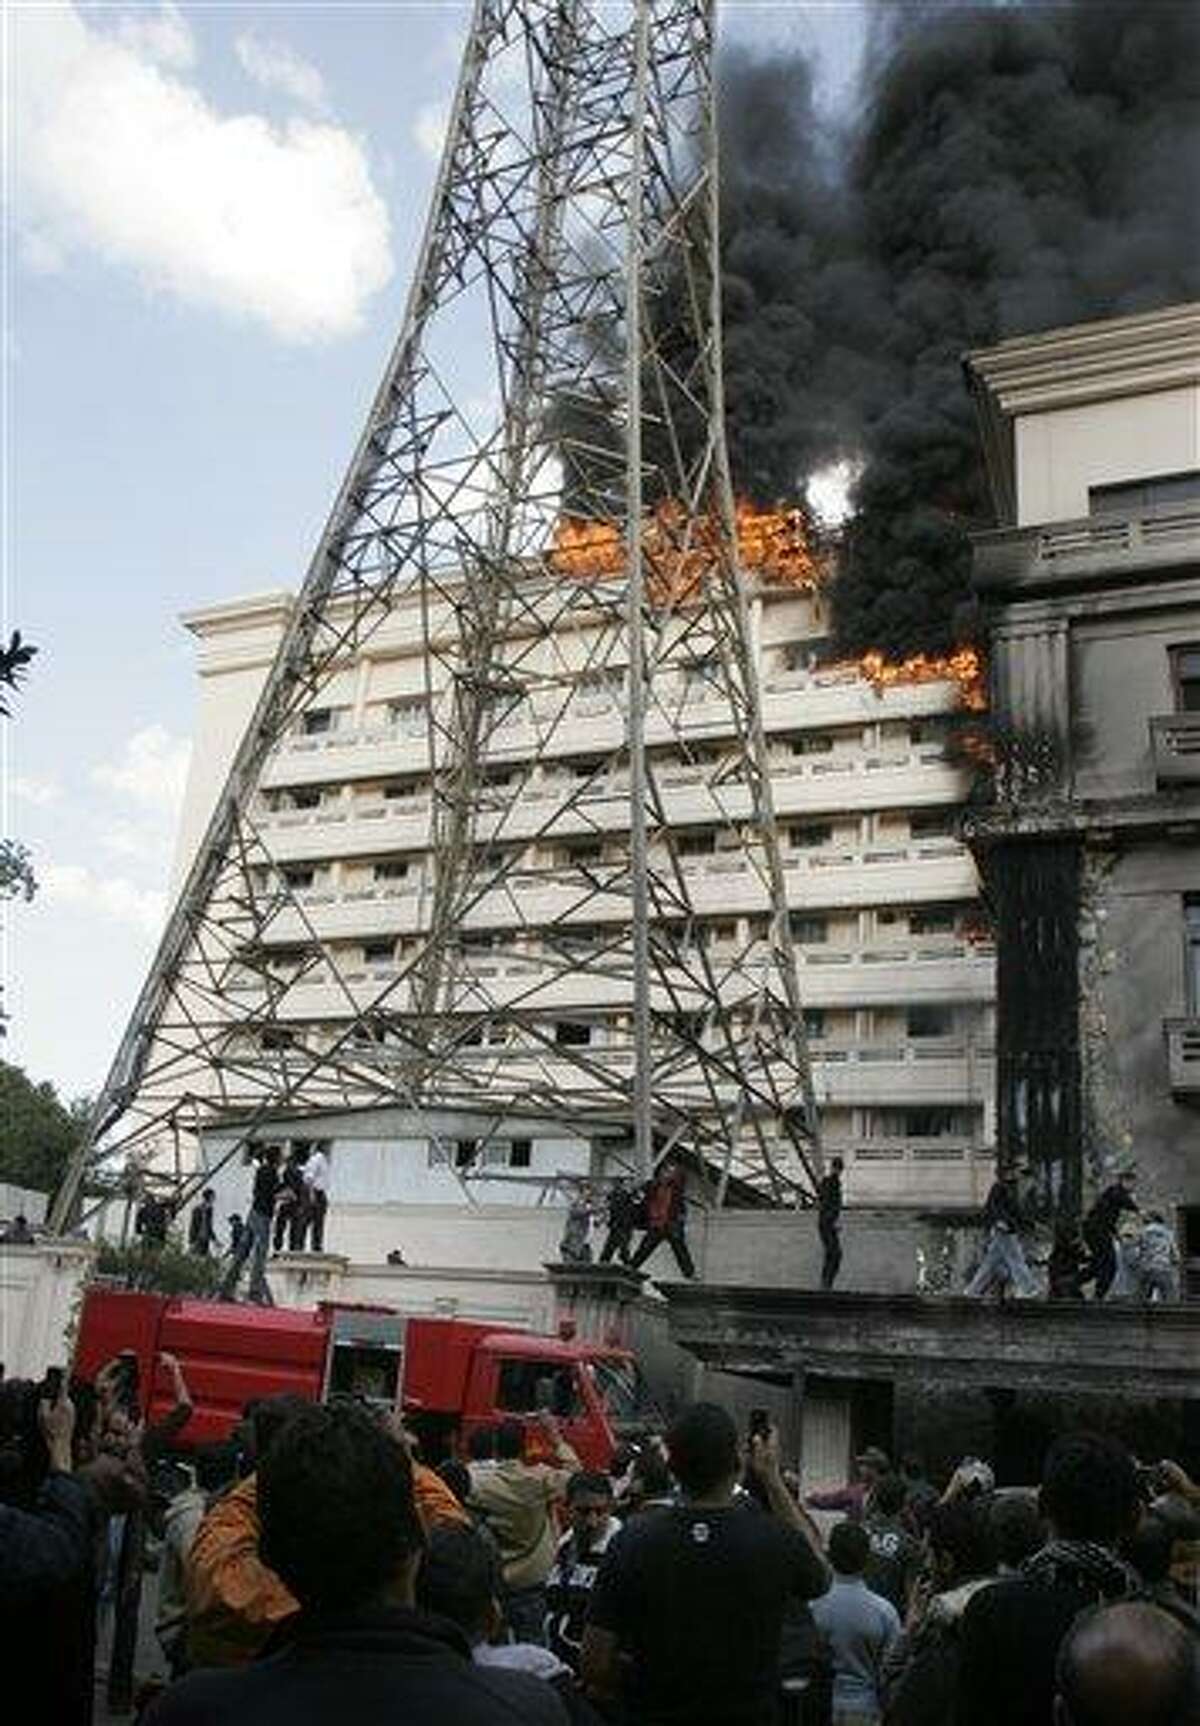 Flames engulfpart of the Interior Ministry complex in Cairo, Egypt, Tuesday, March 22, 2011. An Egyptian security official says police protesting in front of Egypt's Interior Ministry have set fire to part of the downtown complex. The official says protesters lit Tuesday's fire in the building housing in the ministry's personnel department. It then spread to an adjacent building. The fire followed a protest by thousands of low-ranking police officers calling for better wages and working conditions. (AP Photo/Mohammed Abu Zaid)